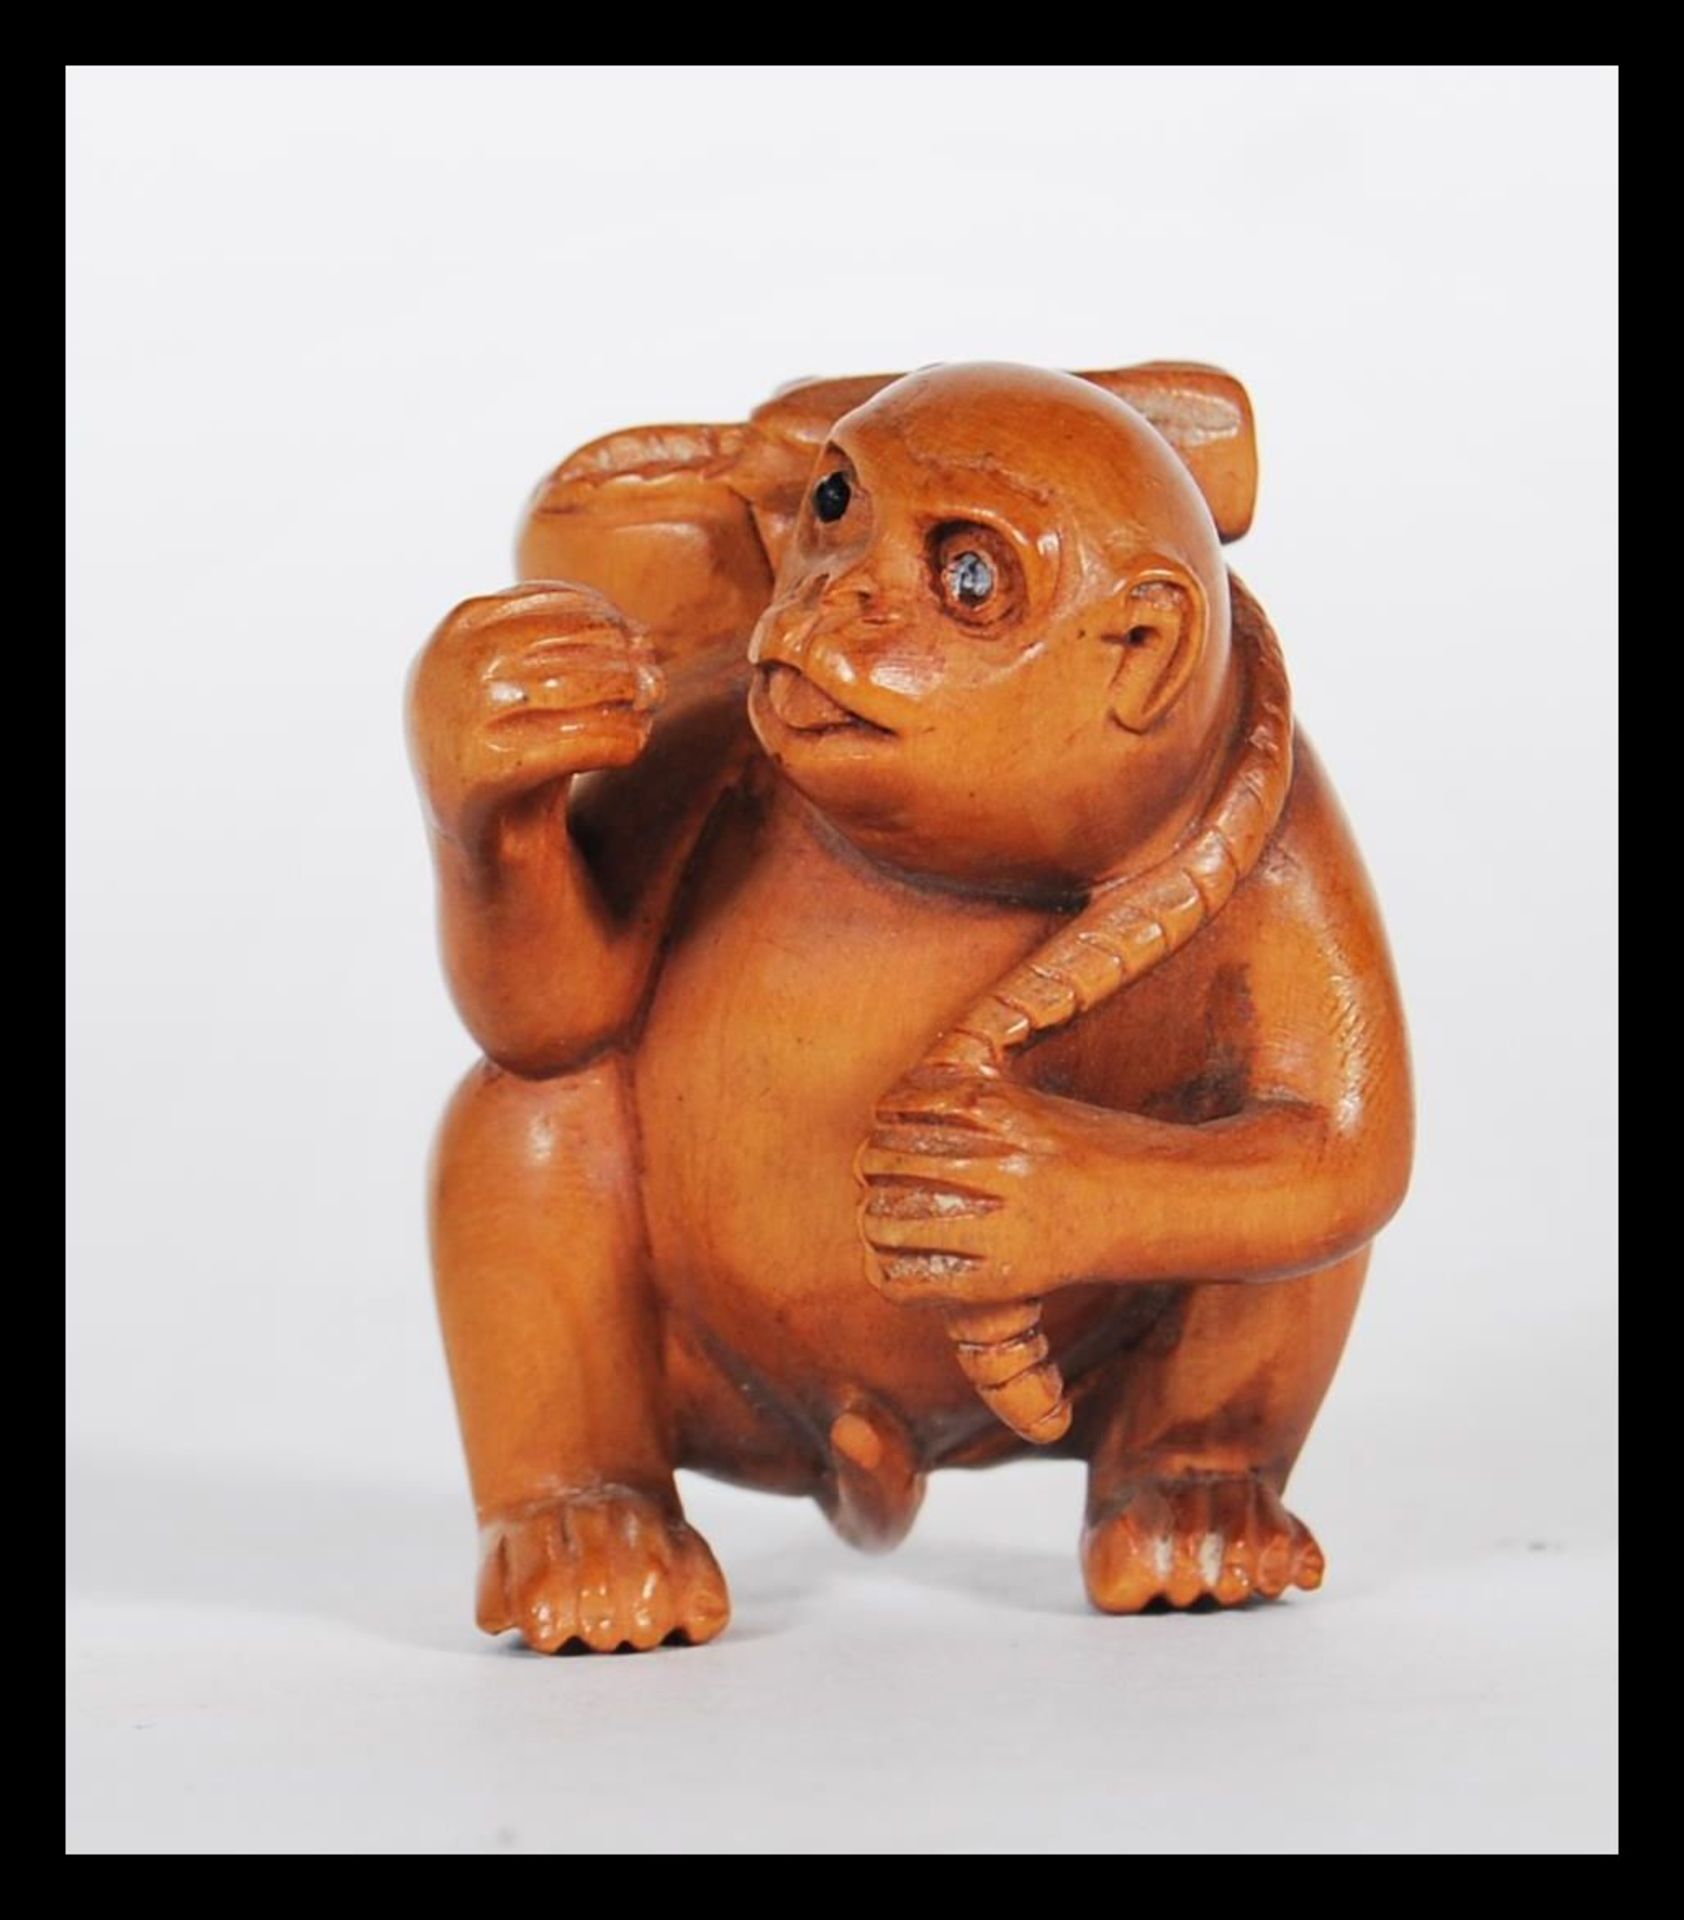 A 20th Century Japanese carved wood netsuke in the form of a monkey carrying a fruit to its back.